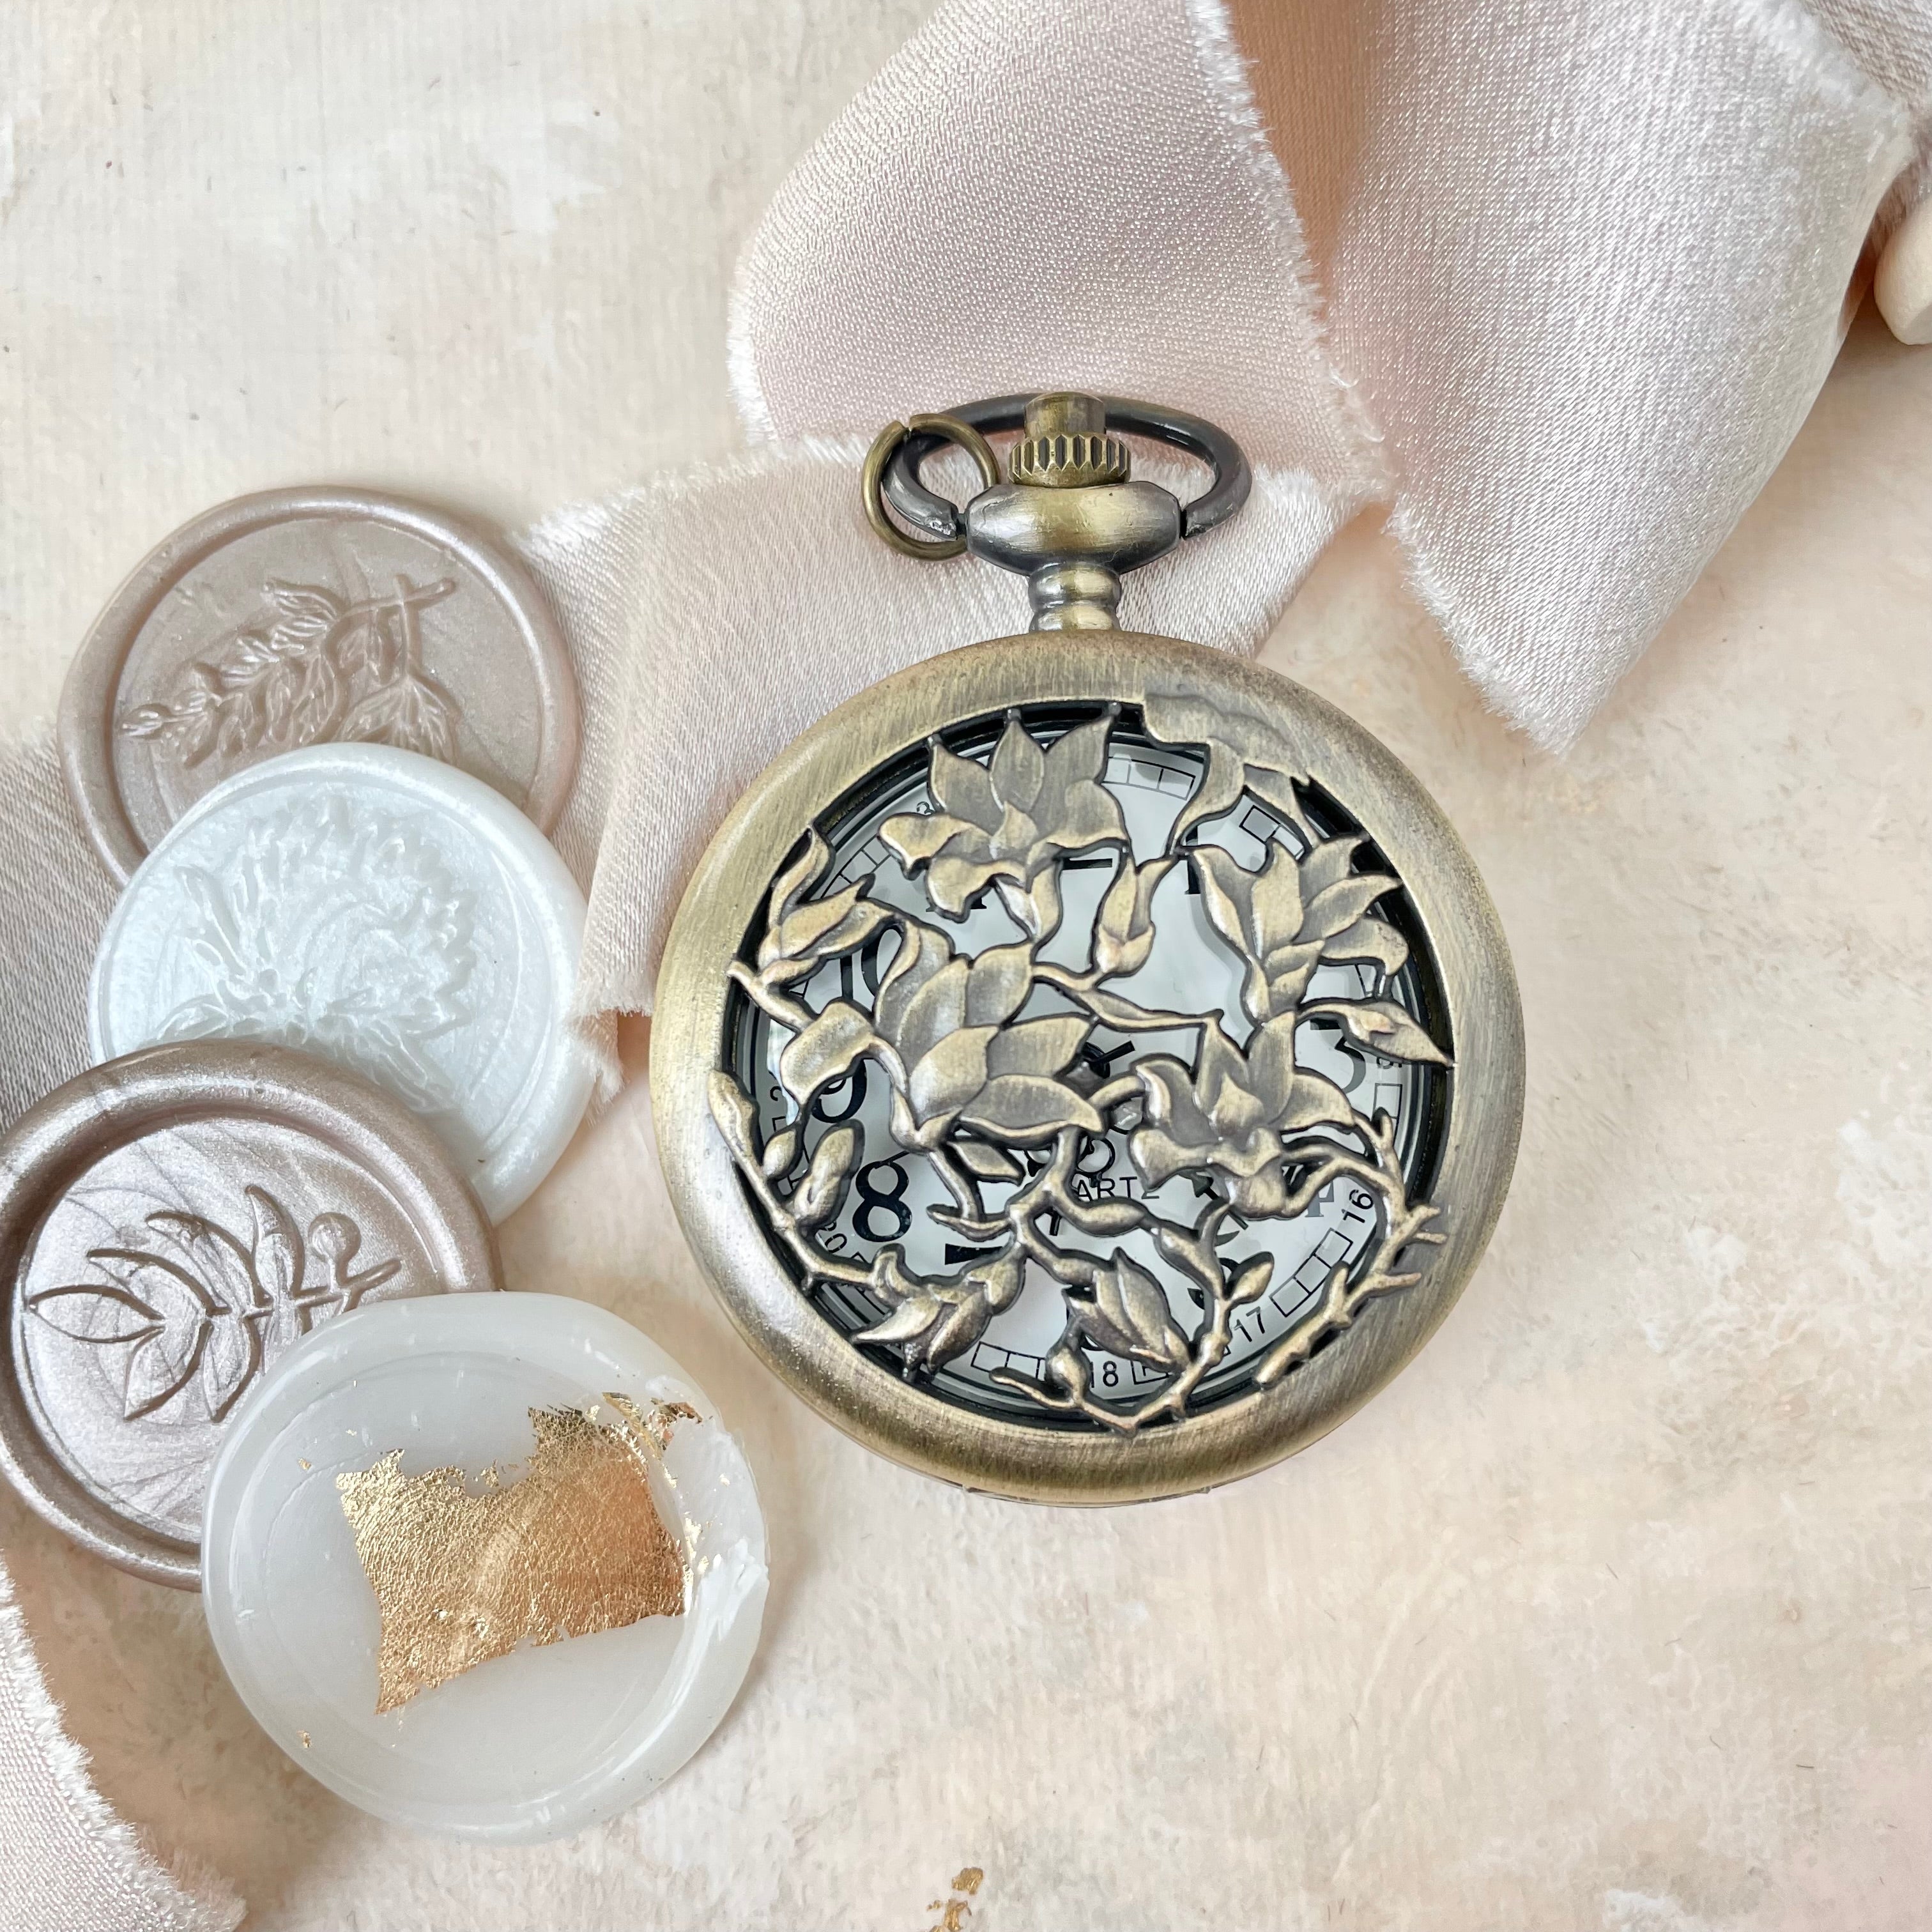 Wax seals styled with vintage pocket watch and champagne ribbon - Wedding Flat lay props from Champagne & GRIT